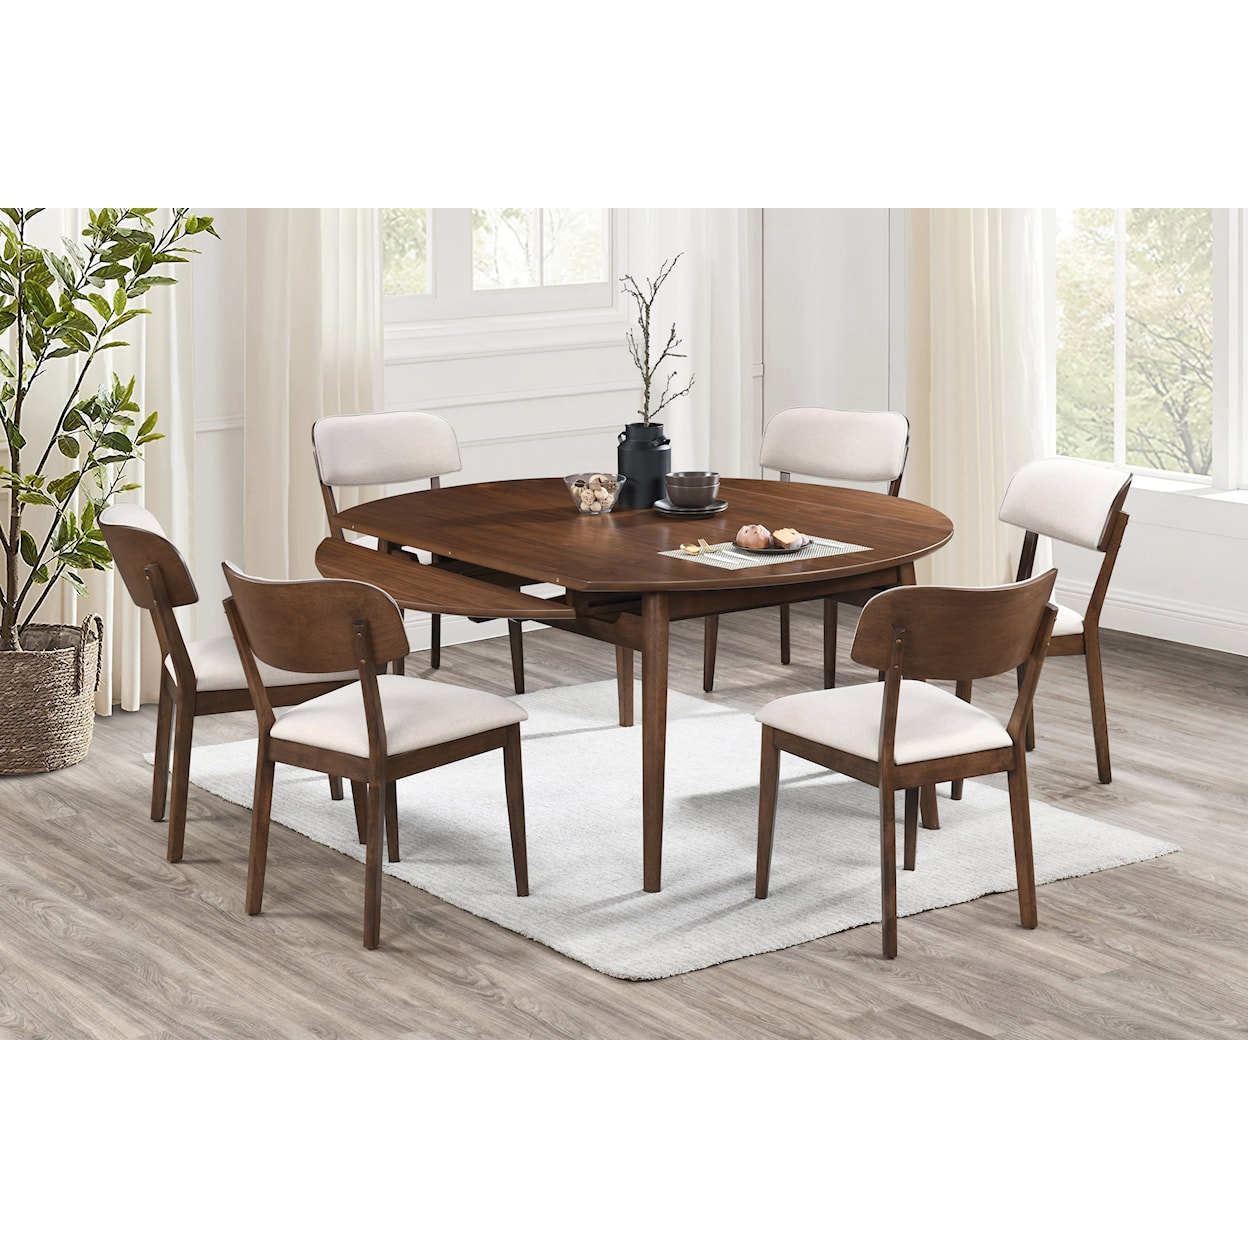 New Classic Bergen Dining Table